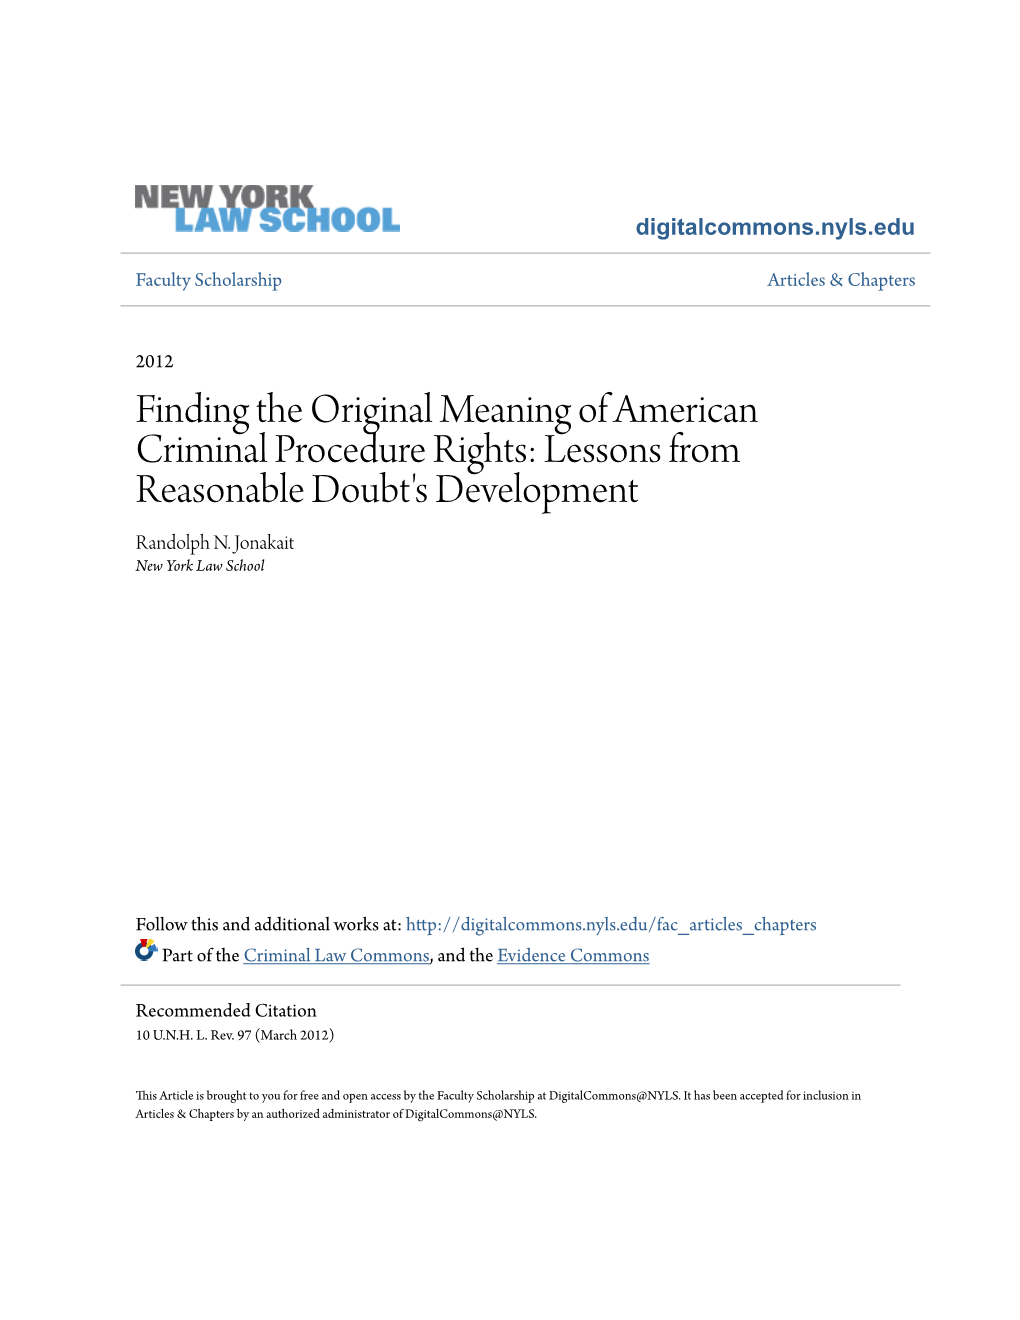 Finding the Original Meaning of American Criminal Procedure Rights: Lessons from Reasonable Doubt's Development Randolph N